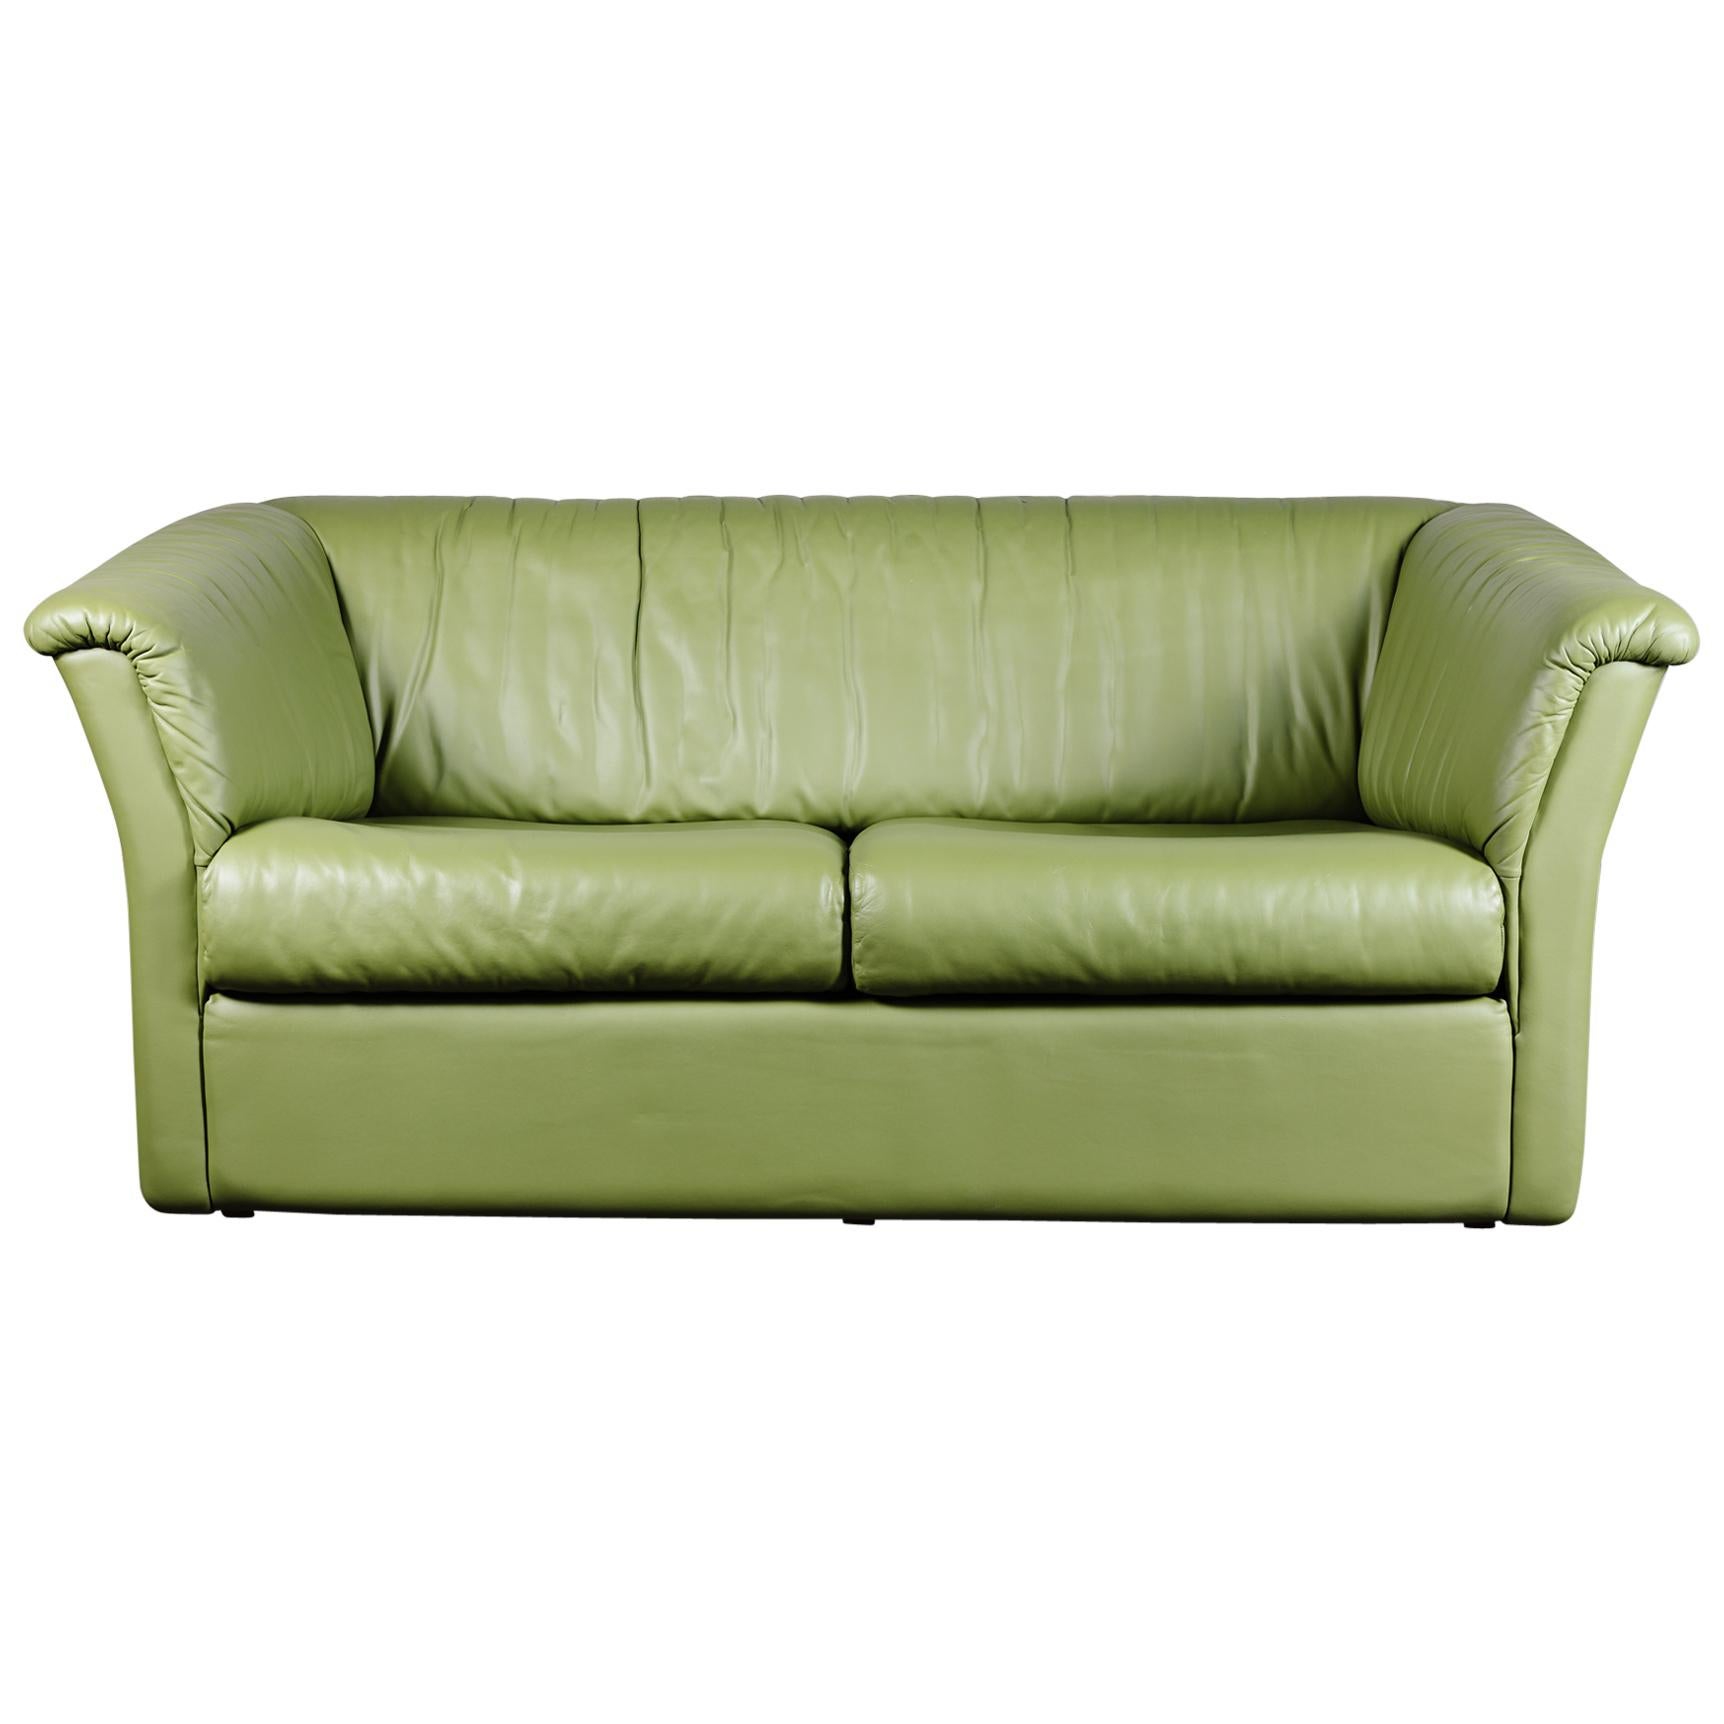 Chic Mid-Century Modern Green Leather Sofa / Loveseat by De Sede For Sale